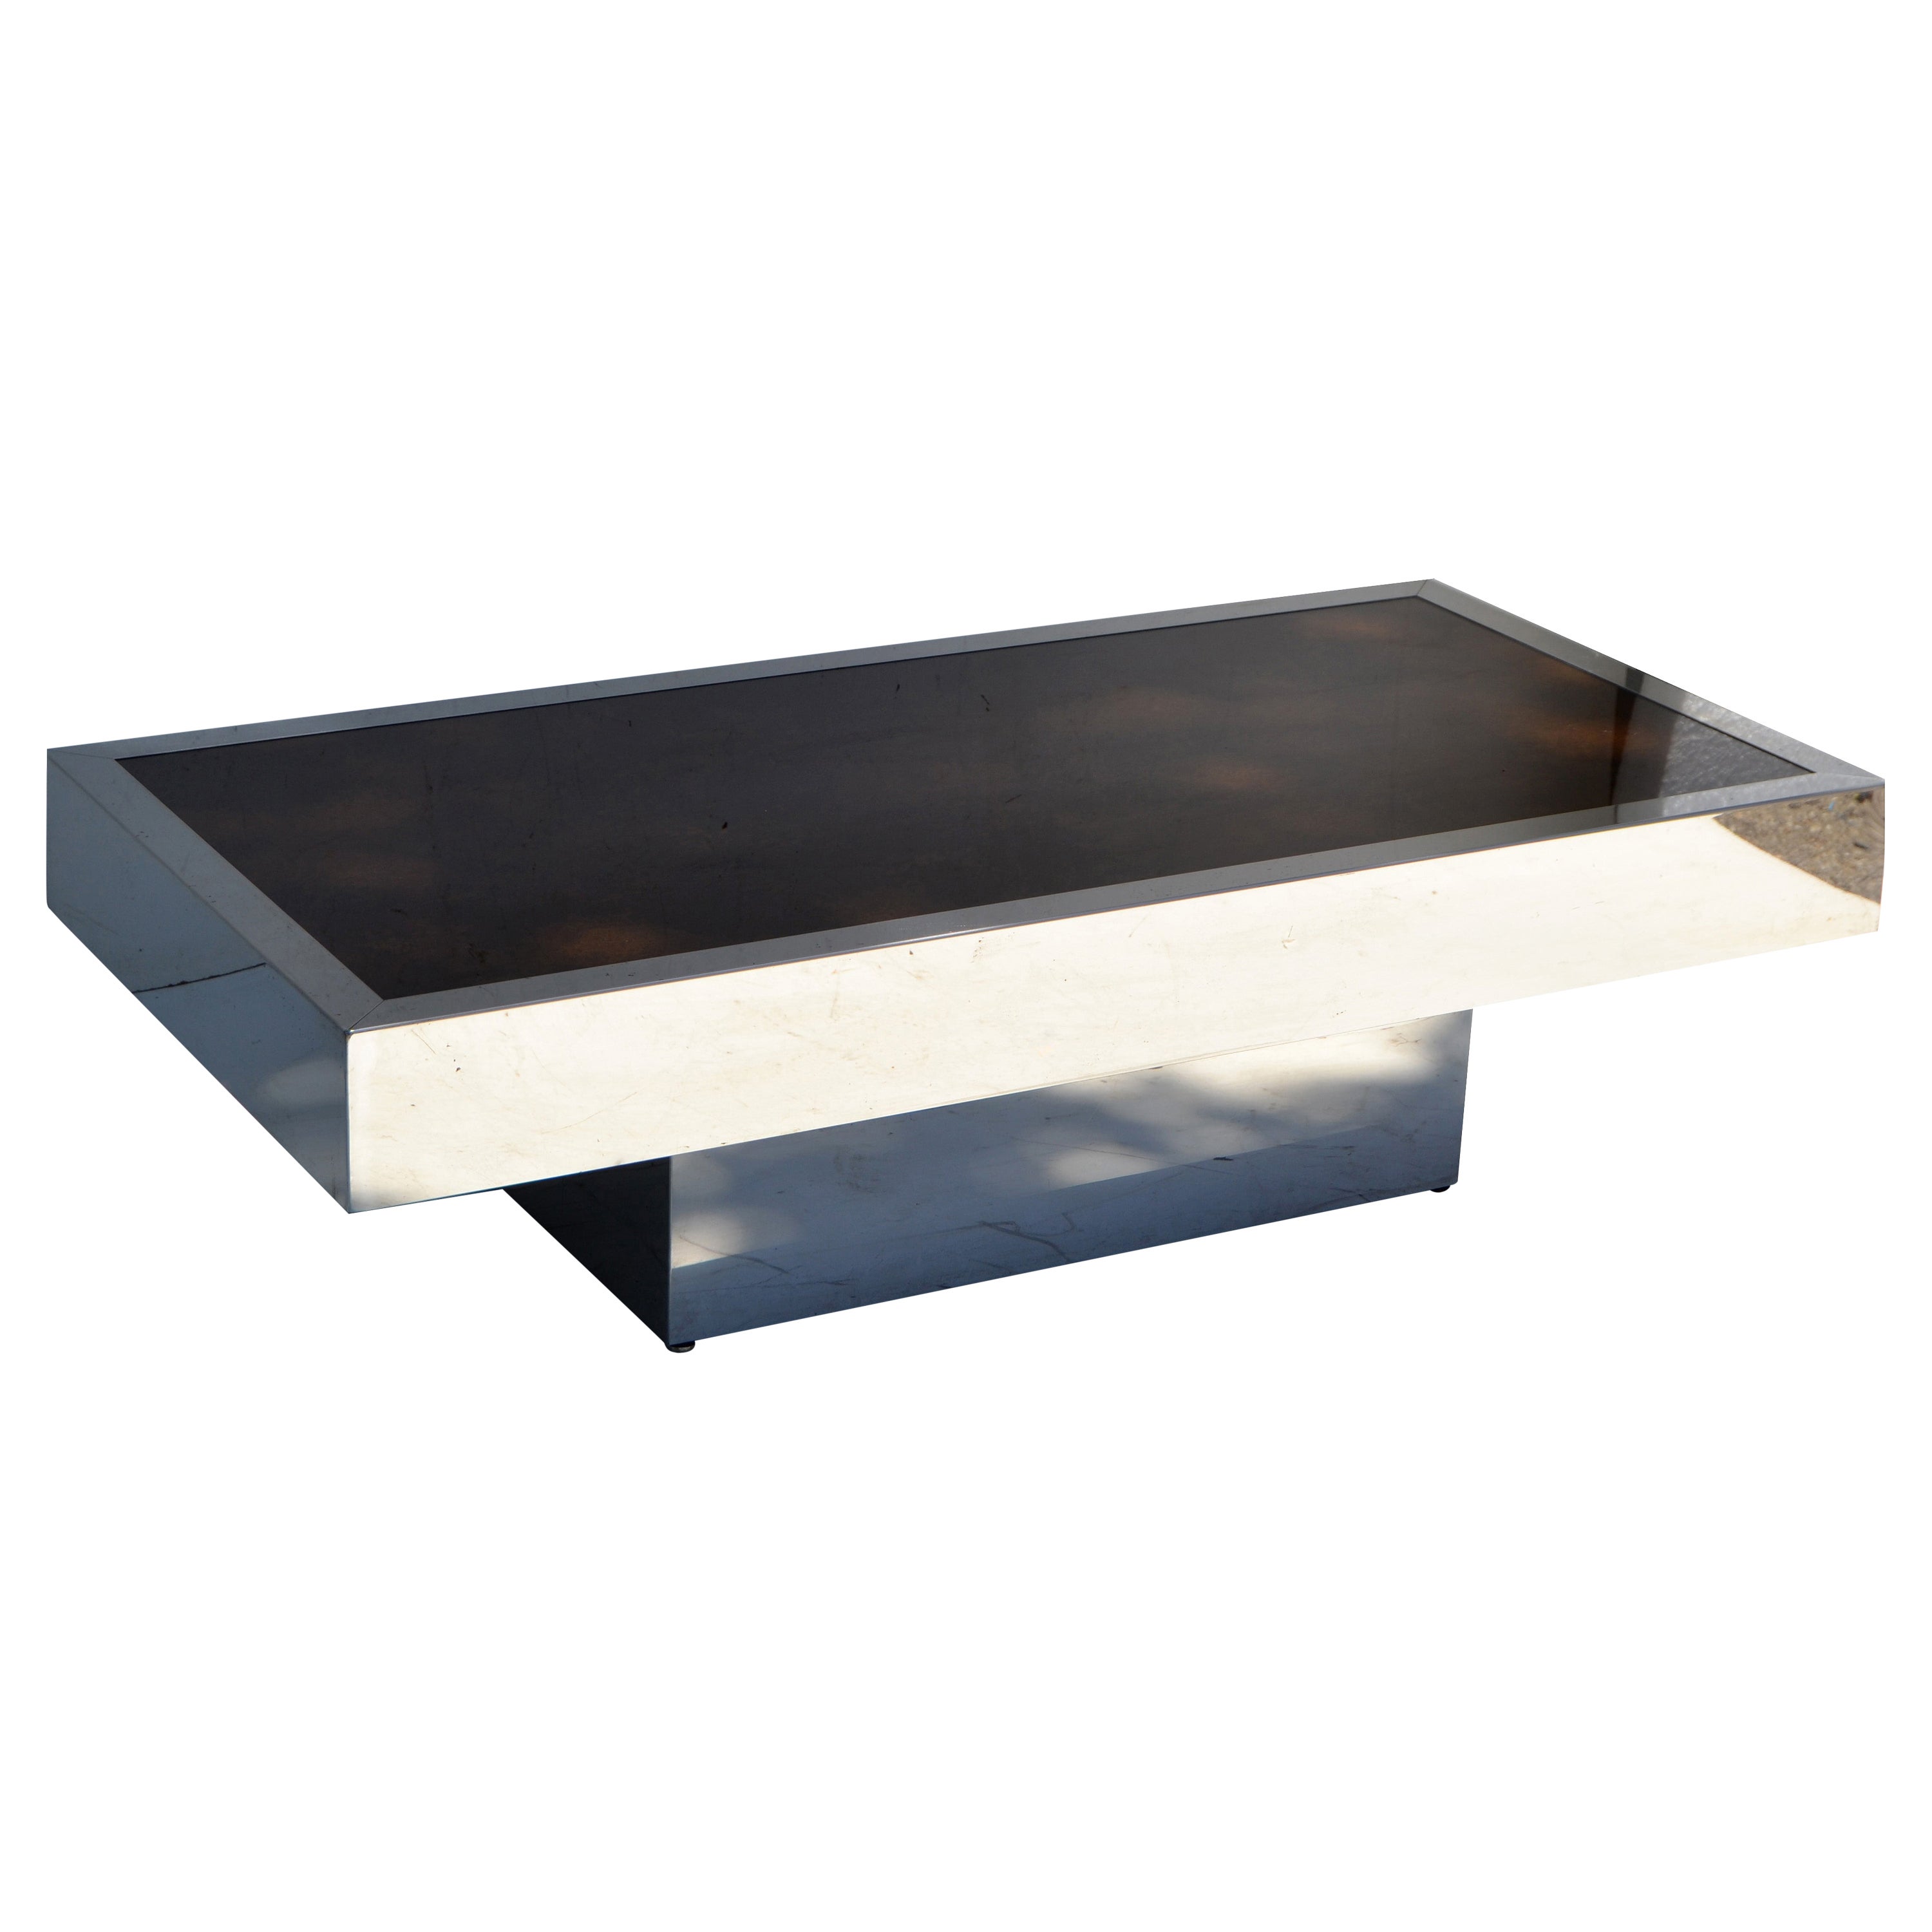 Italian Willy Rizzo Style Chrome Steel & Brown Cloudy Glass Coffee Table, 1970 For Sale